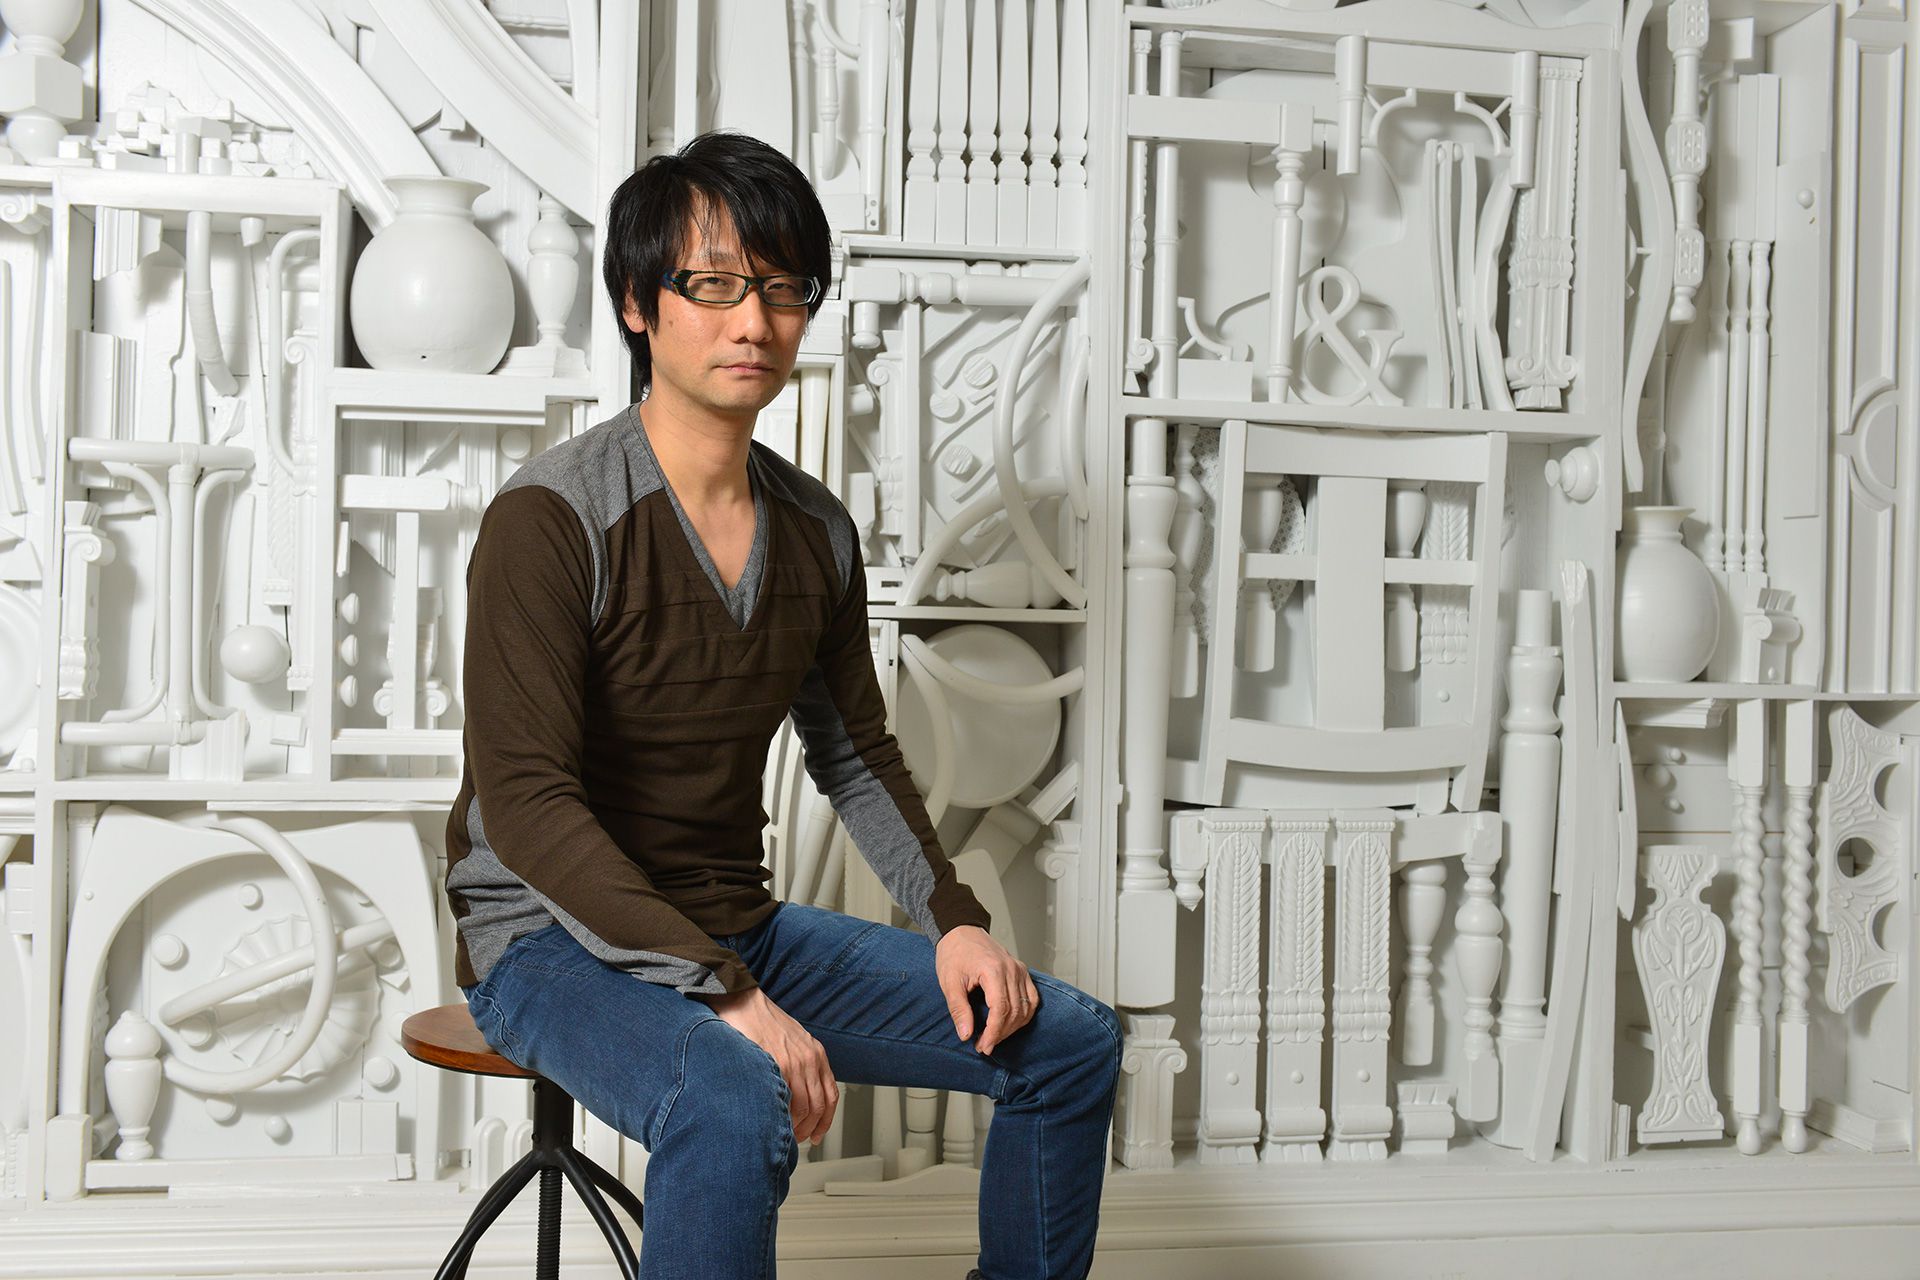 Hideo Kojima's game studio says it will consider legal action for fake assassin posts